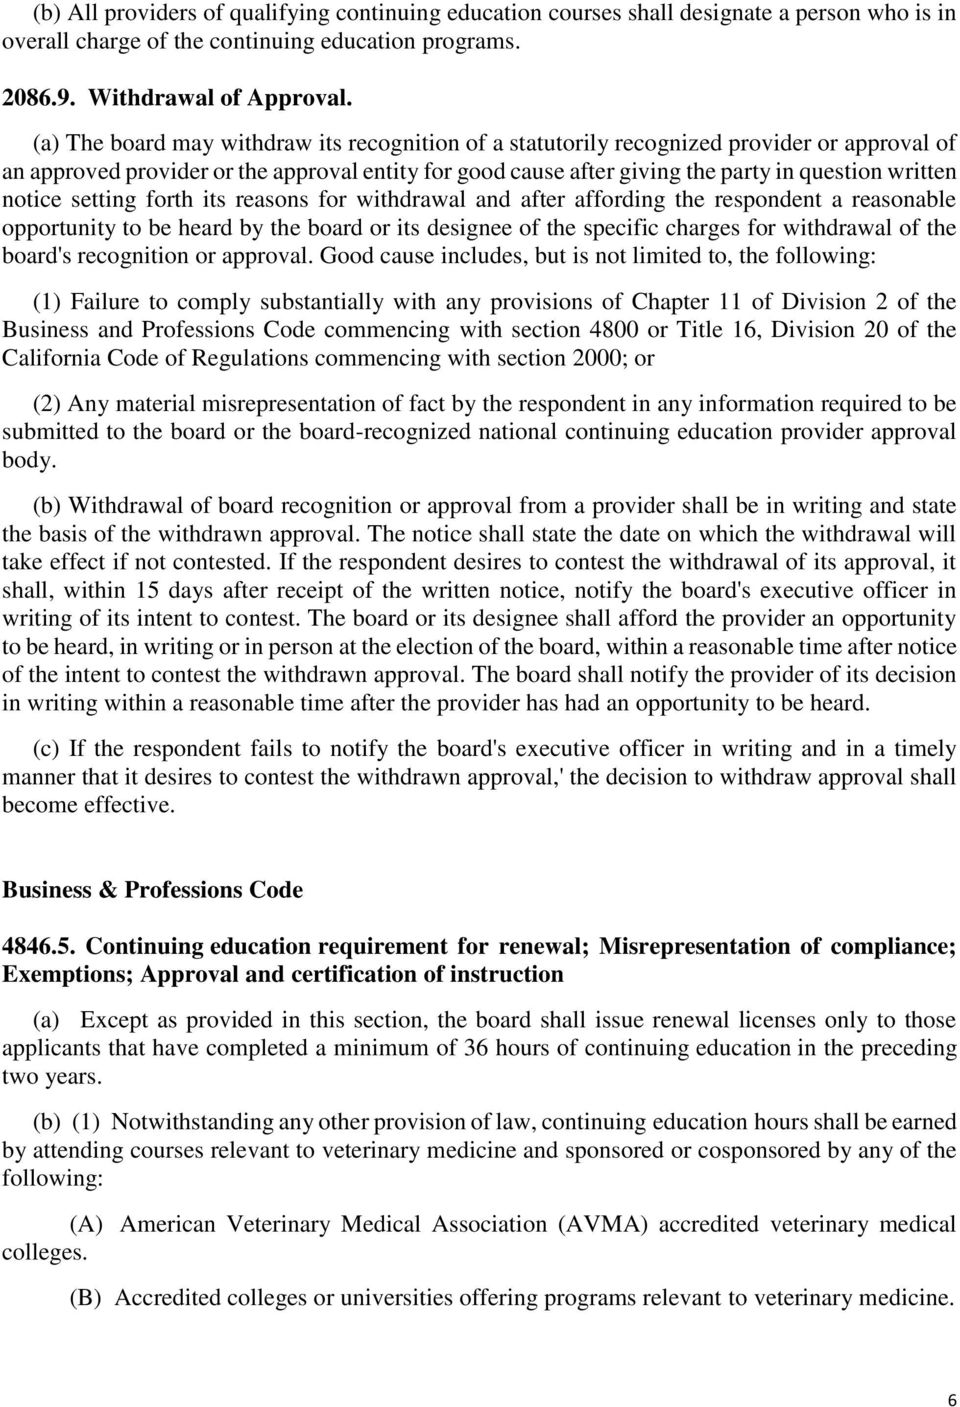 notice setting forth its reasons for withdrawal and after affording the respondent a reasonable opportunity to be heard by the board or its designee of the specific charges for withdrawal of the